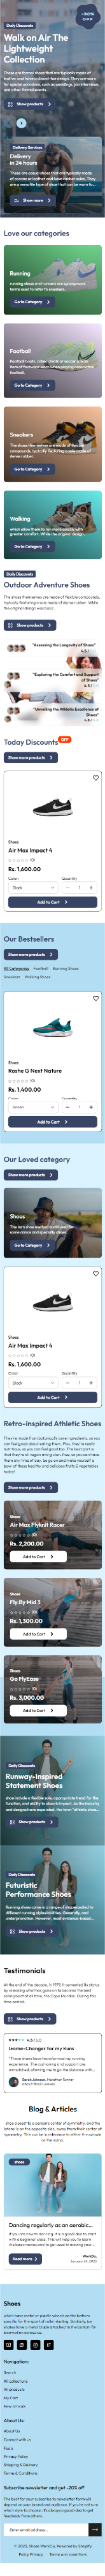 Shoes Theme Add-on for eCommerceGo - WorkDo